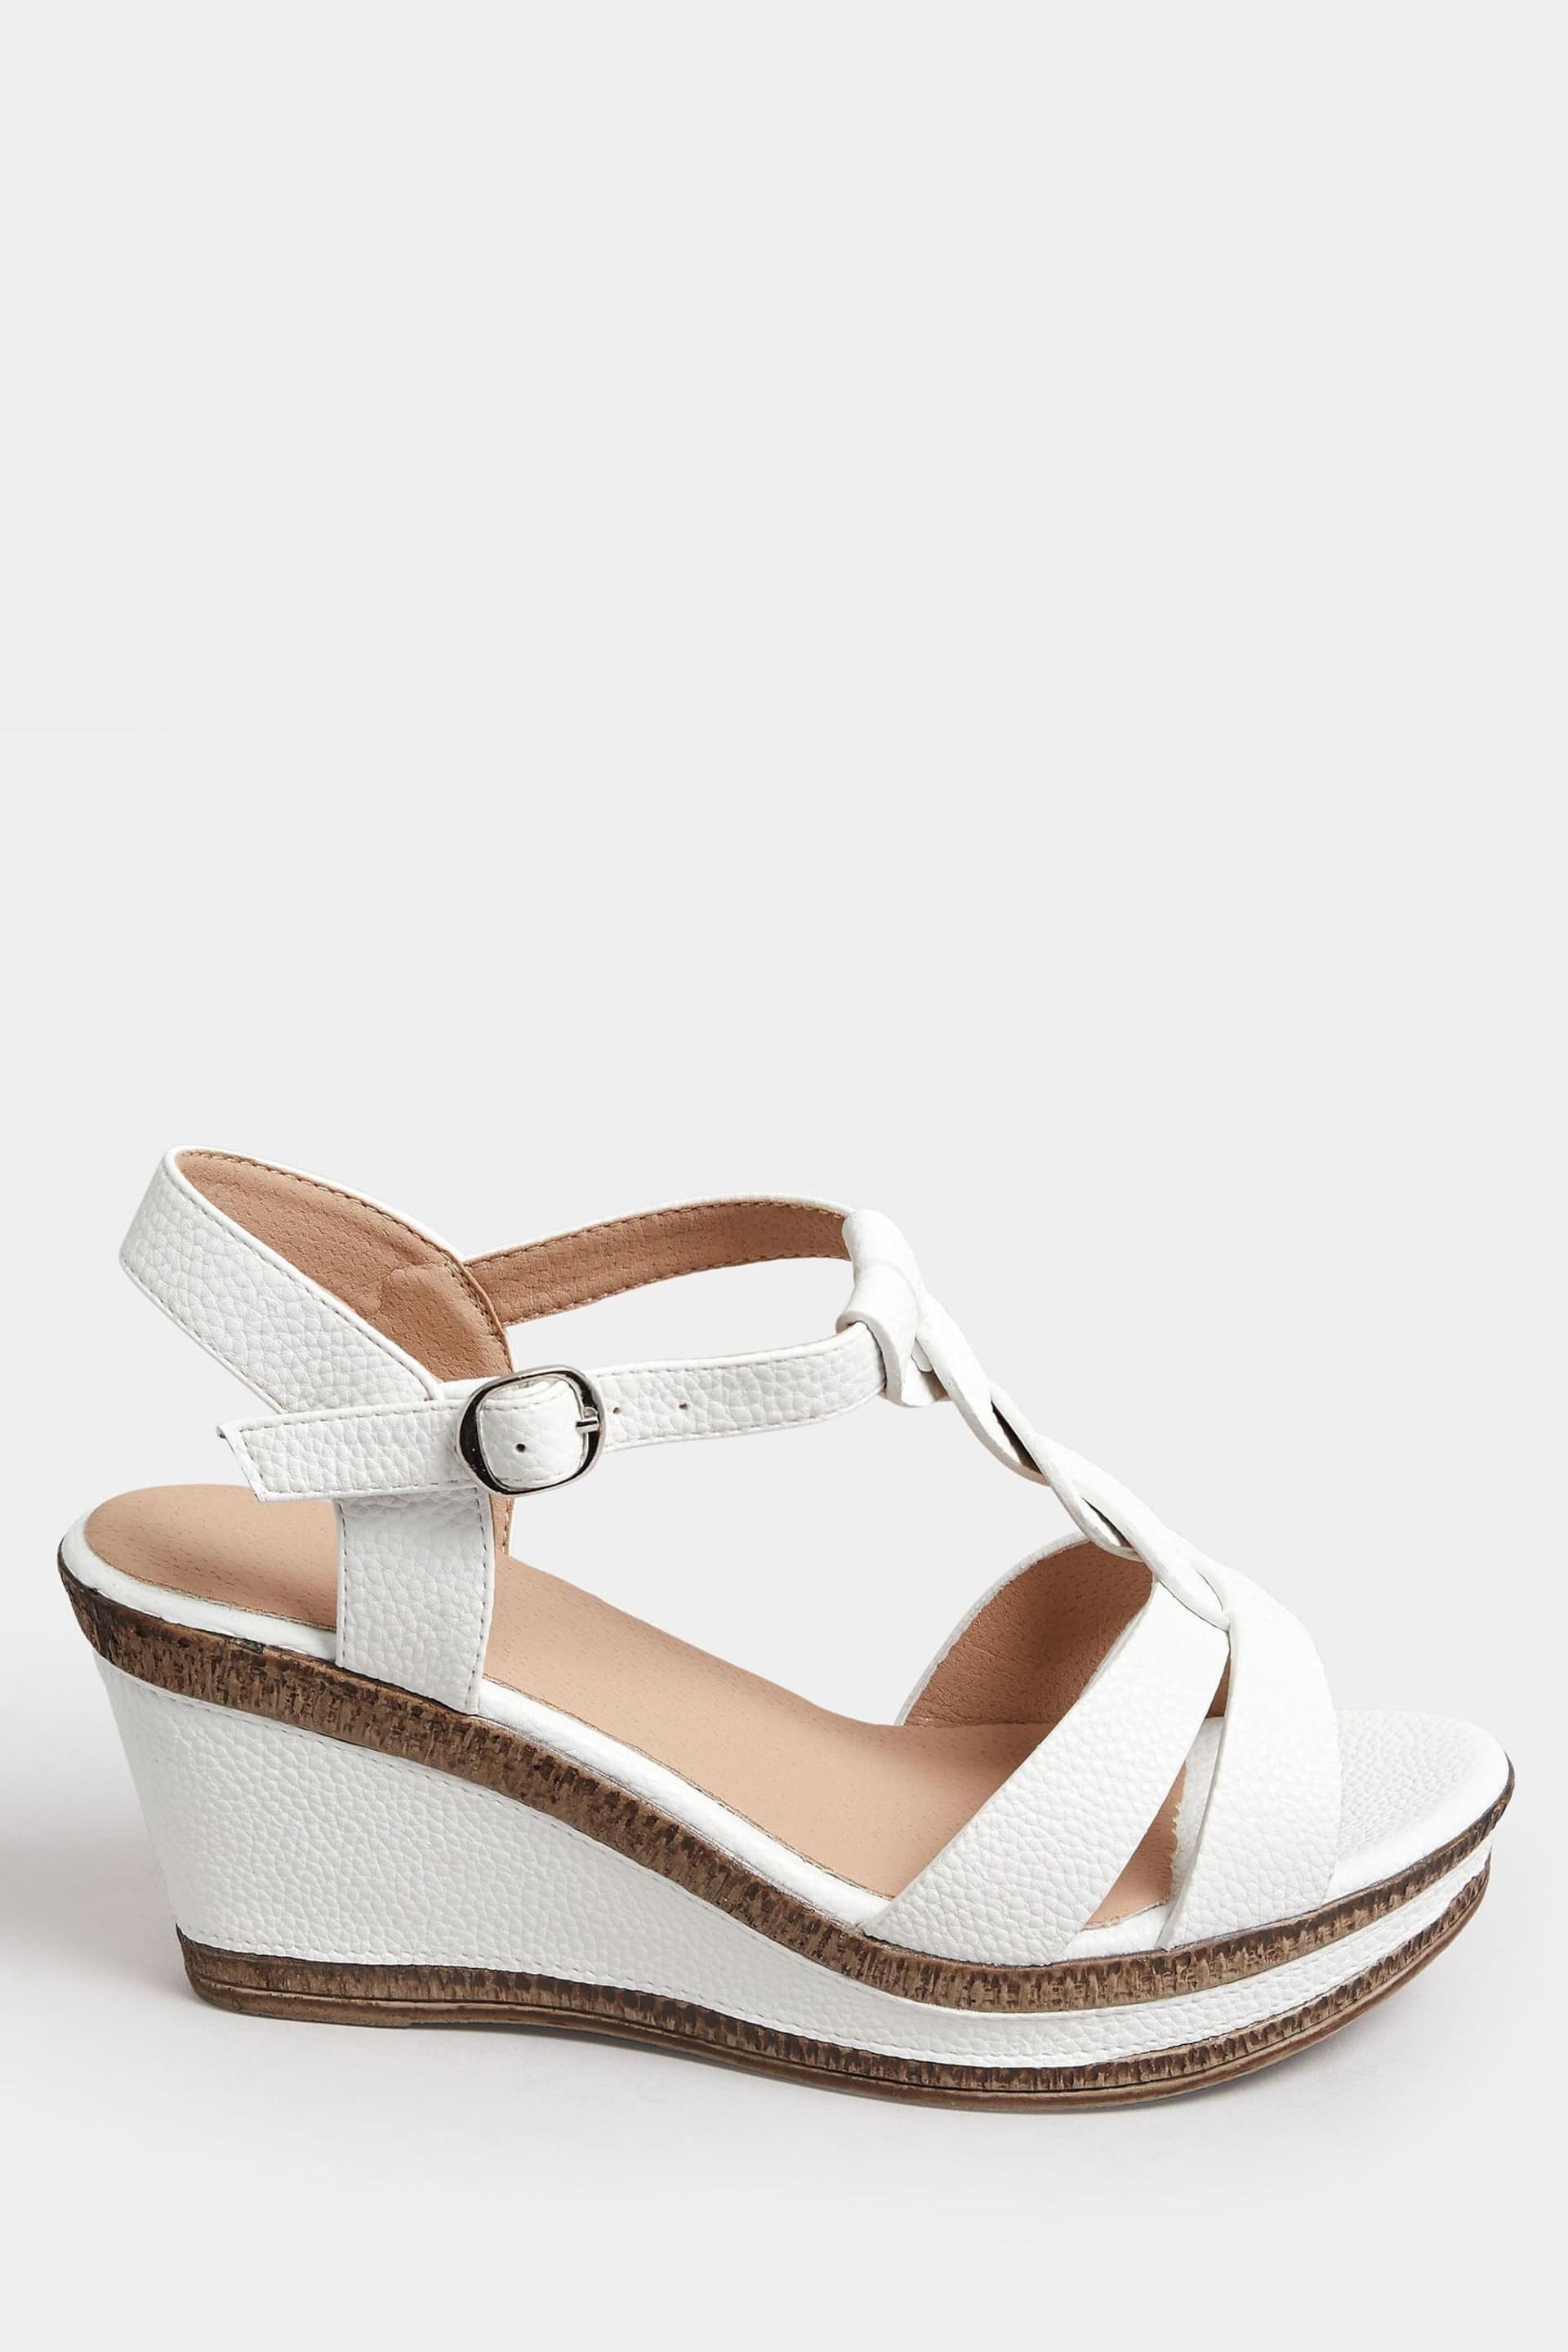 Yours Curve White Cross Strap Wedge Heels In Extra Wide EEE Fit - Image 2 of 5